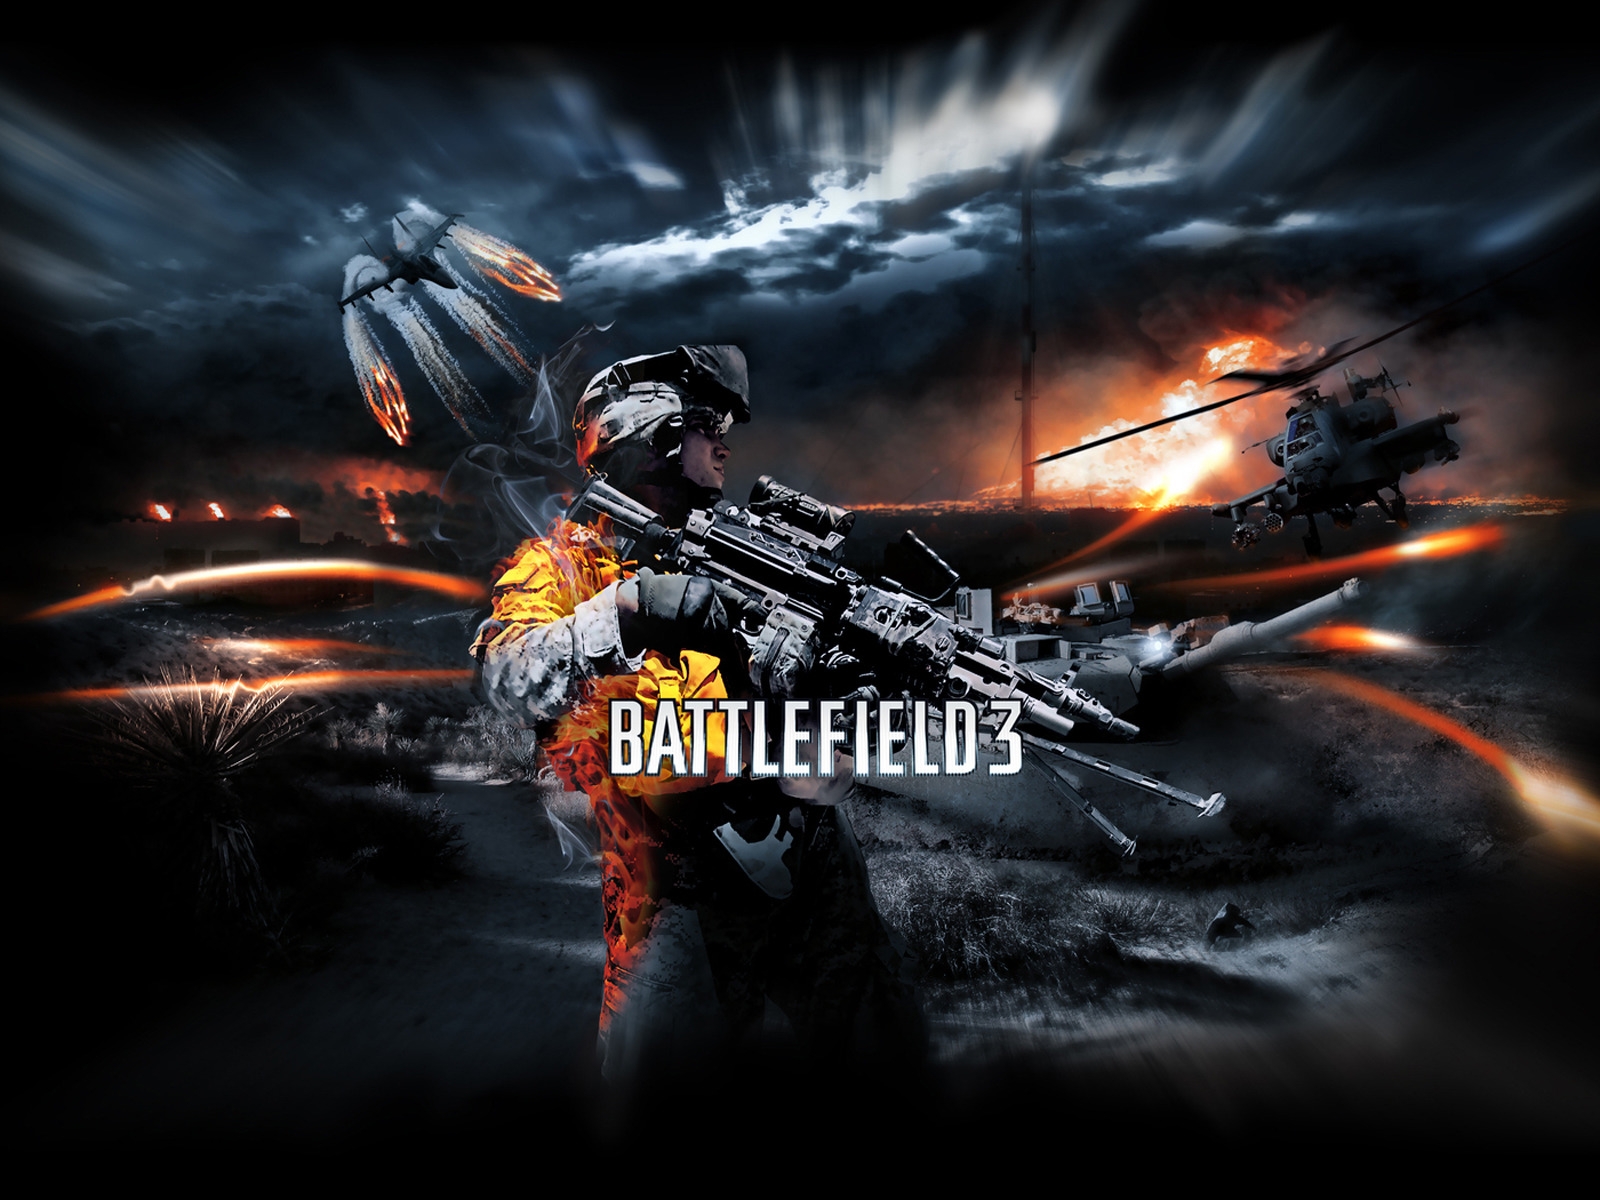 Battlefield 3 Poster for 1600 x 1200 resolution